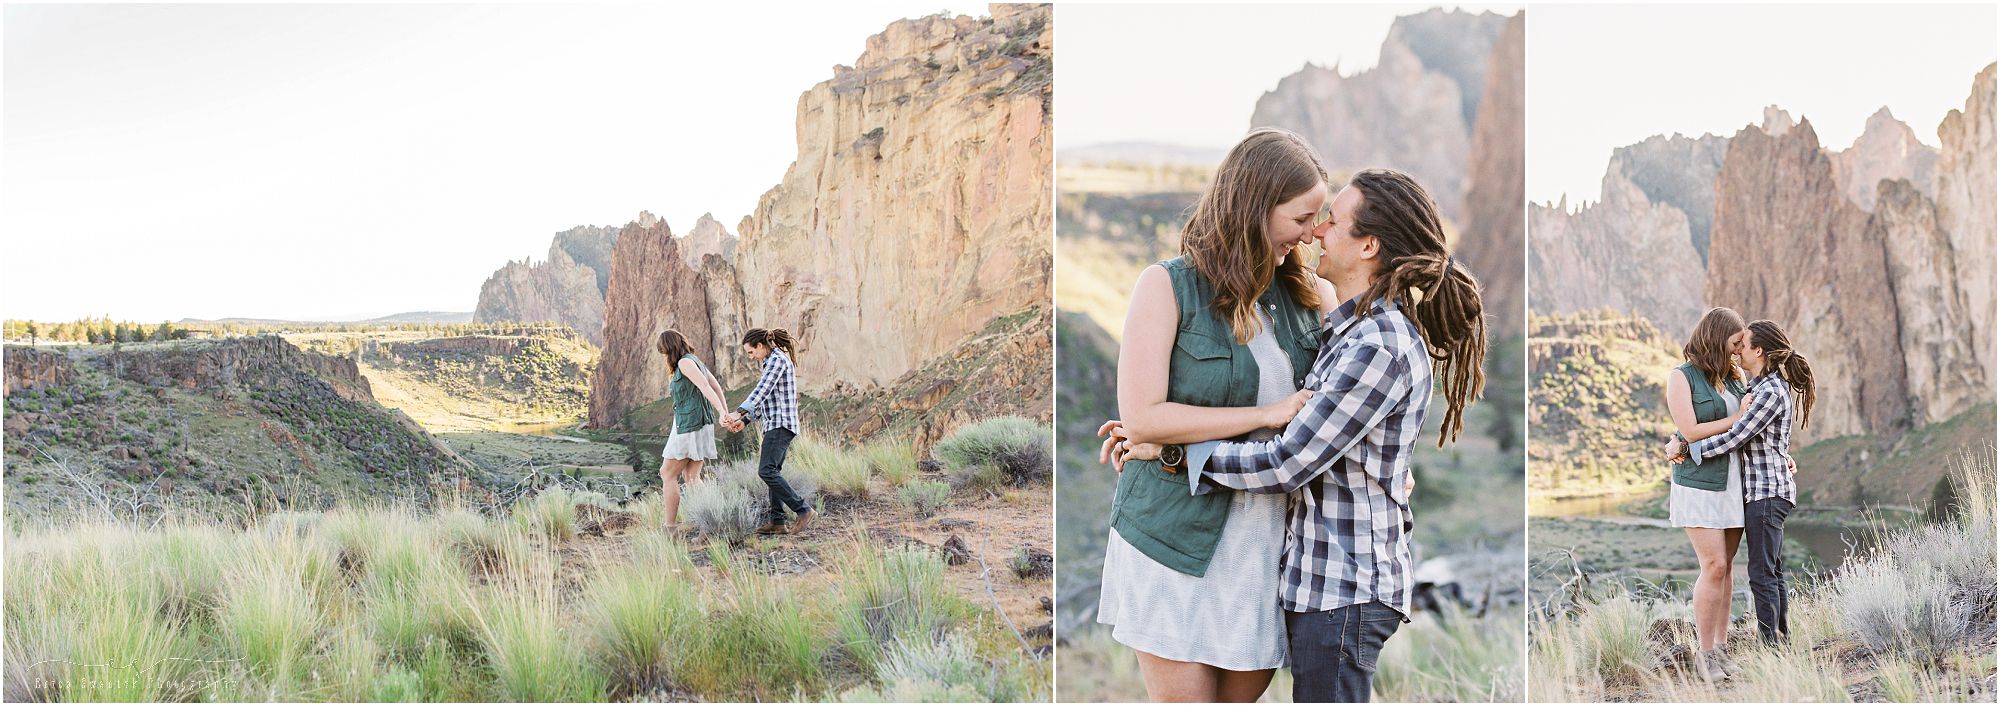 An amazing spring engagement session at Smith Rock State Park in Oregon. | Erica Swantek Photography